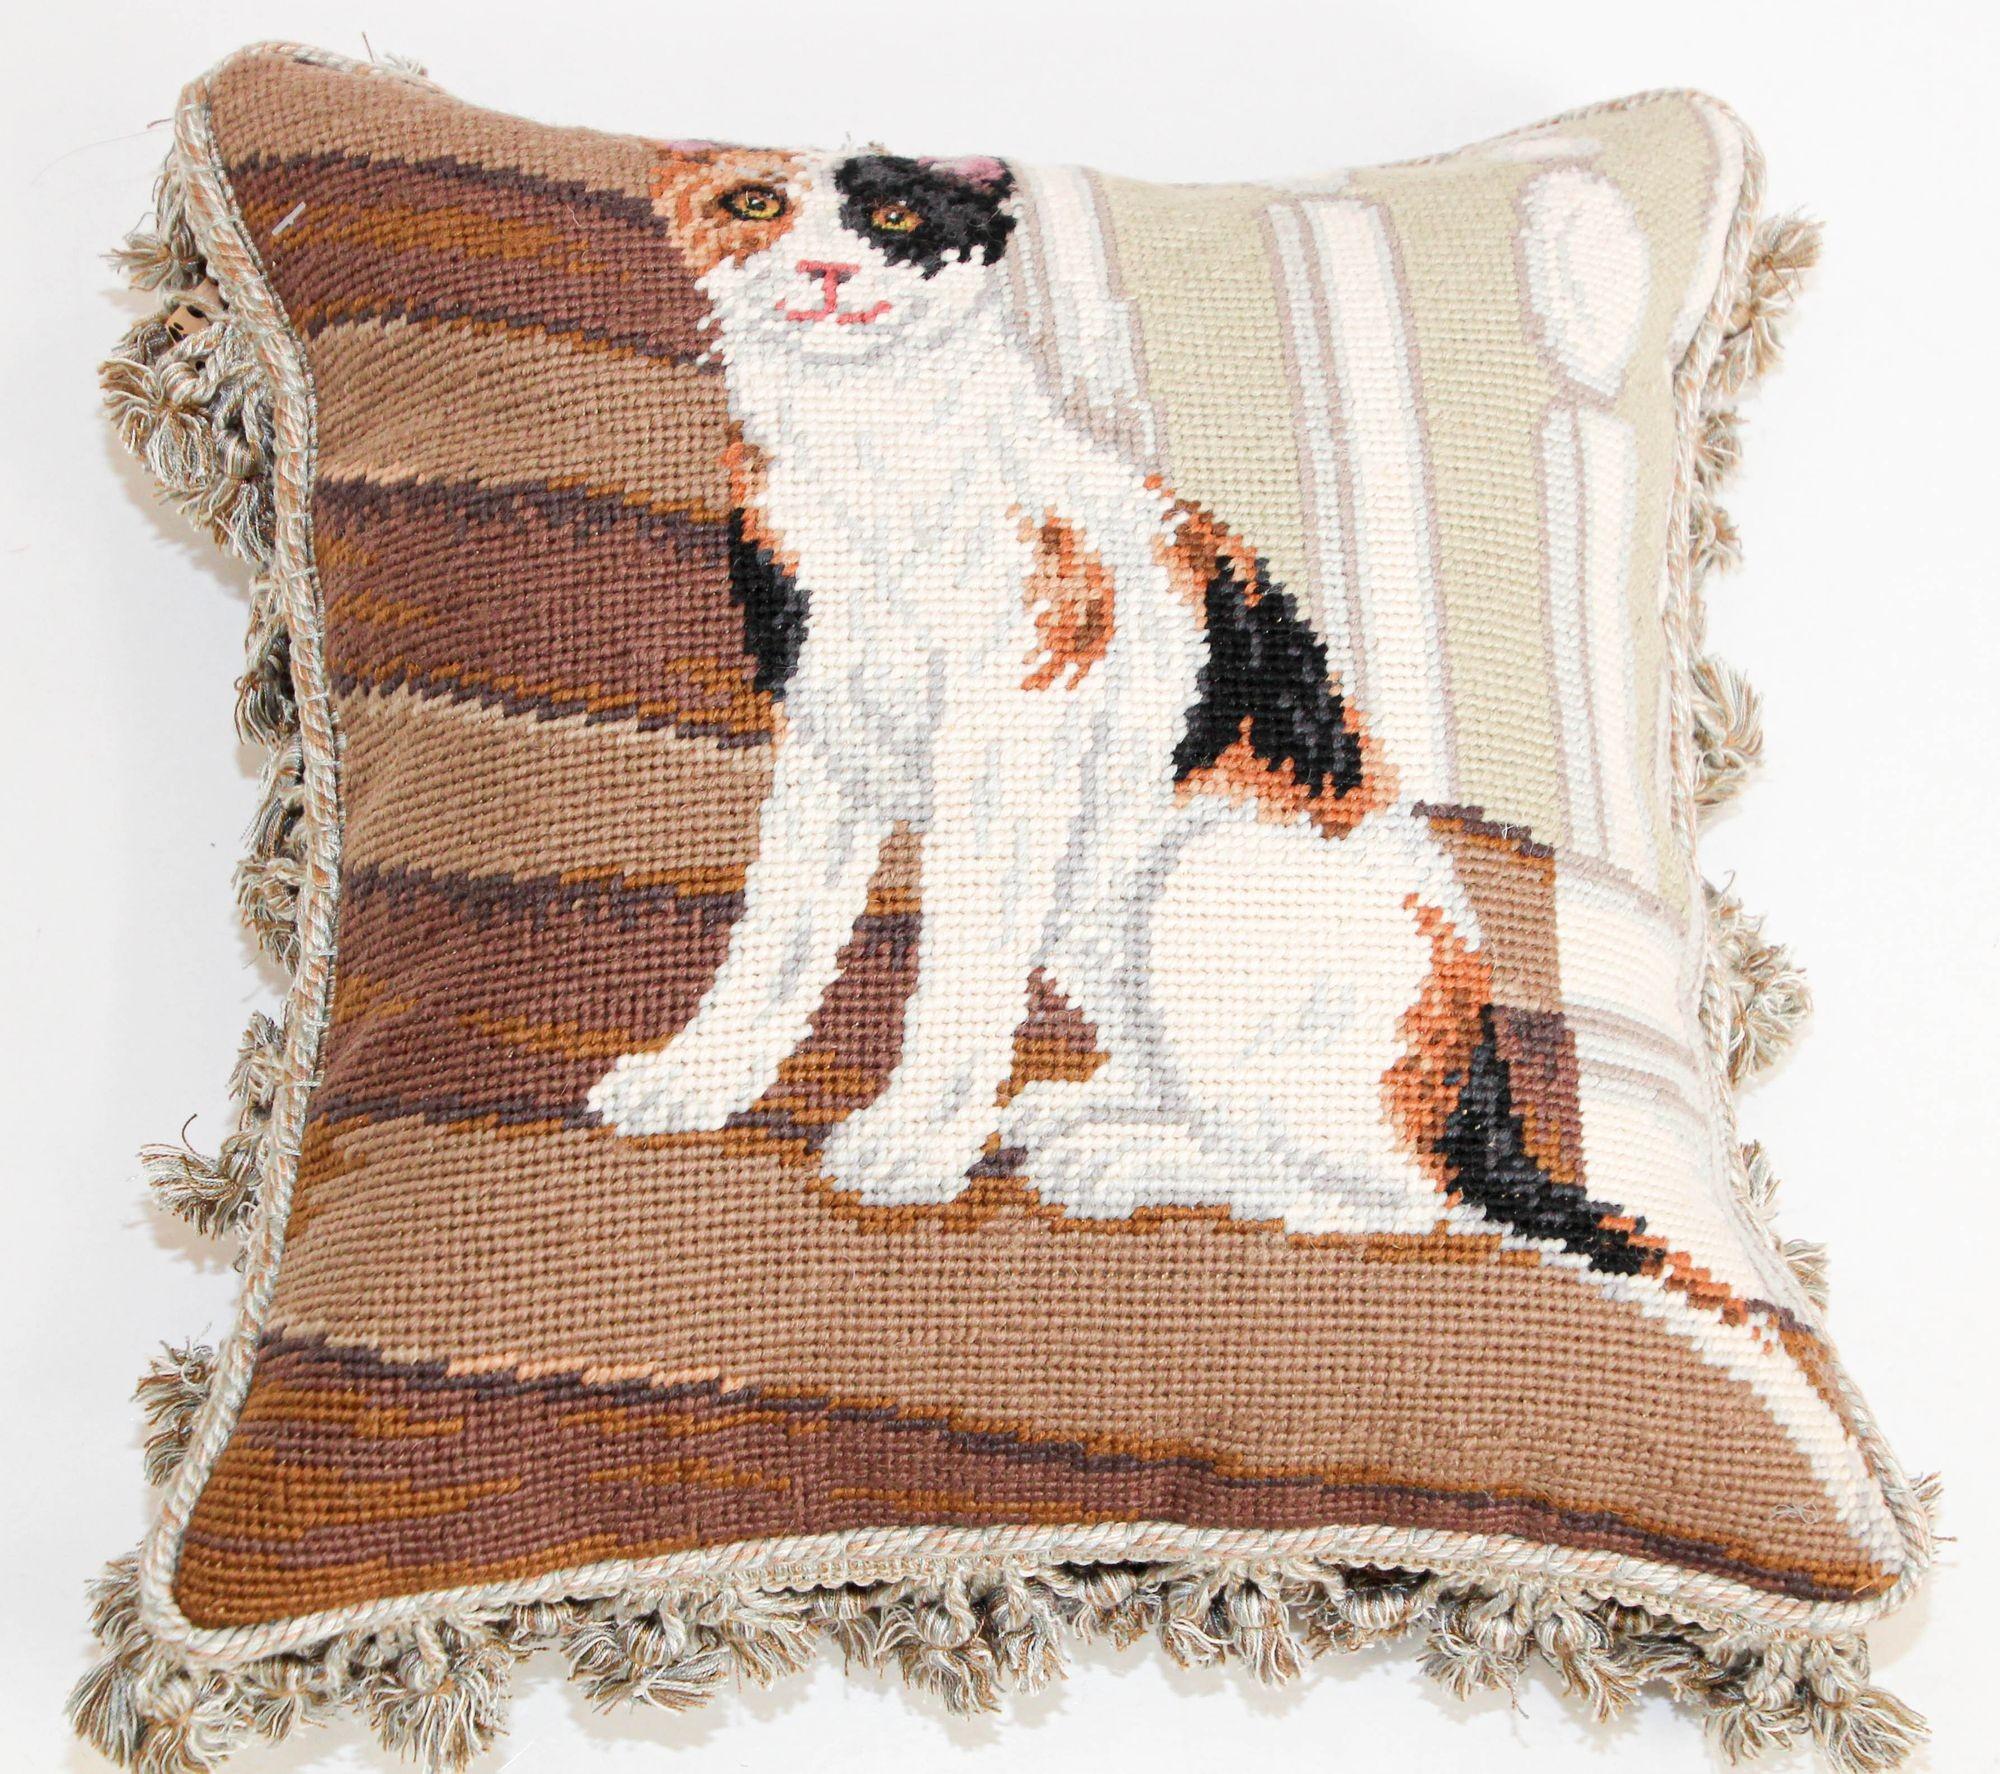 Vintage throw decorative needlepoint cat design pillow.
Vintage charming dog pillow featuring portrait of a cat.
Hand-crafted in 100% wool needlepoint embroidery throw pillow in Aubusson style with cotton cording fringe tassels.
Great gift for